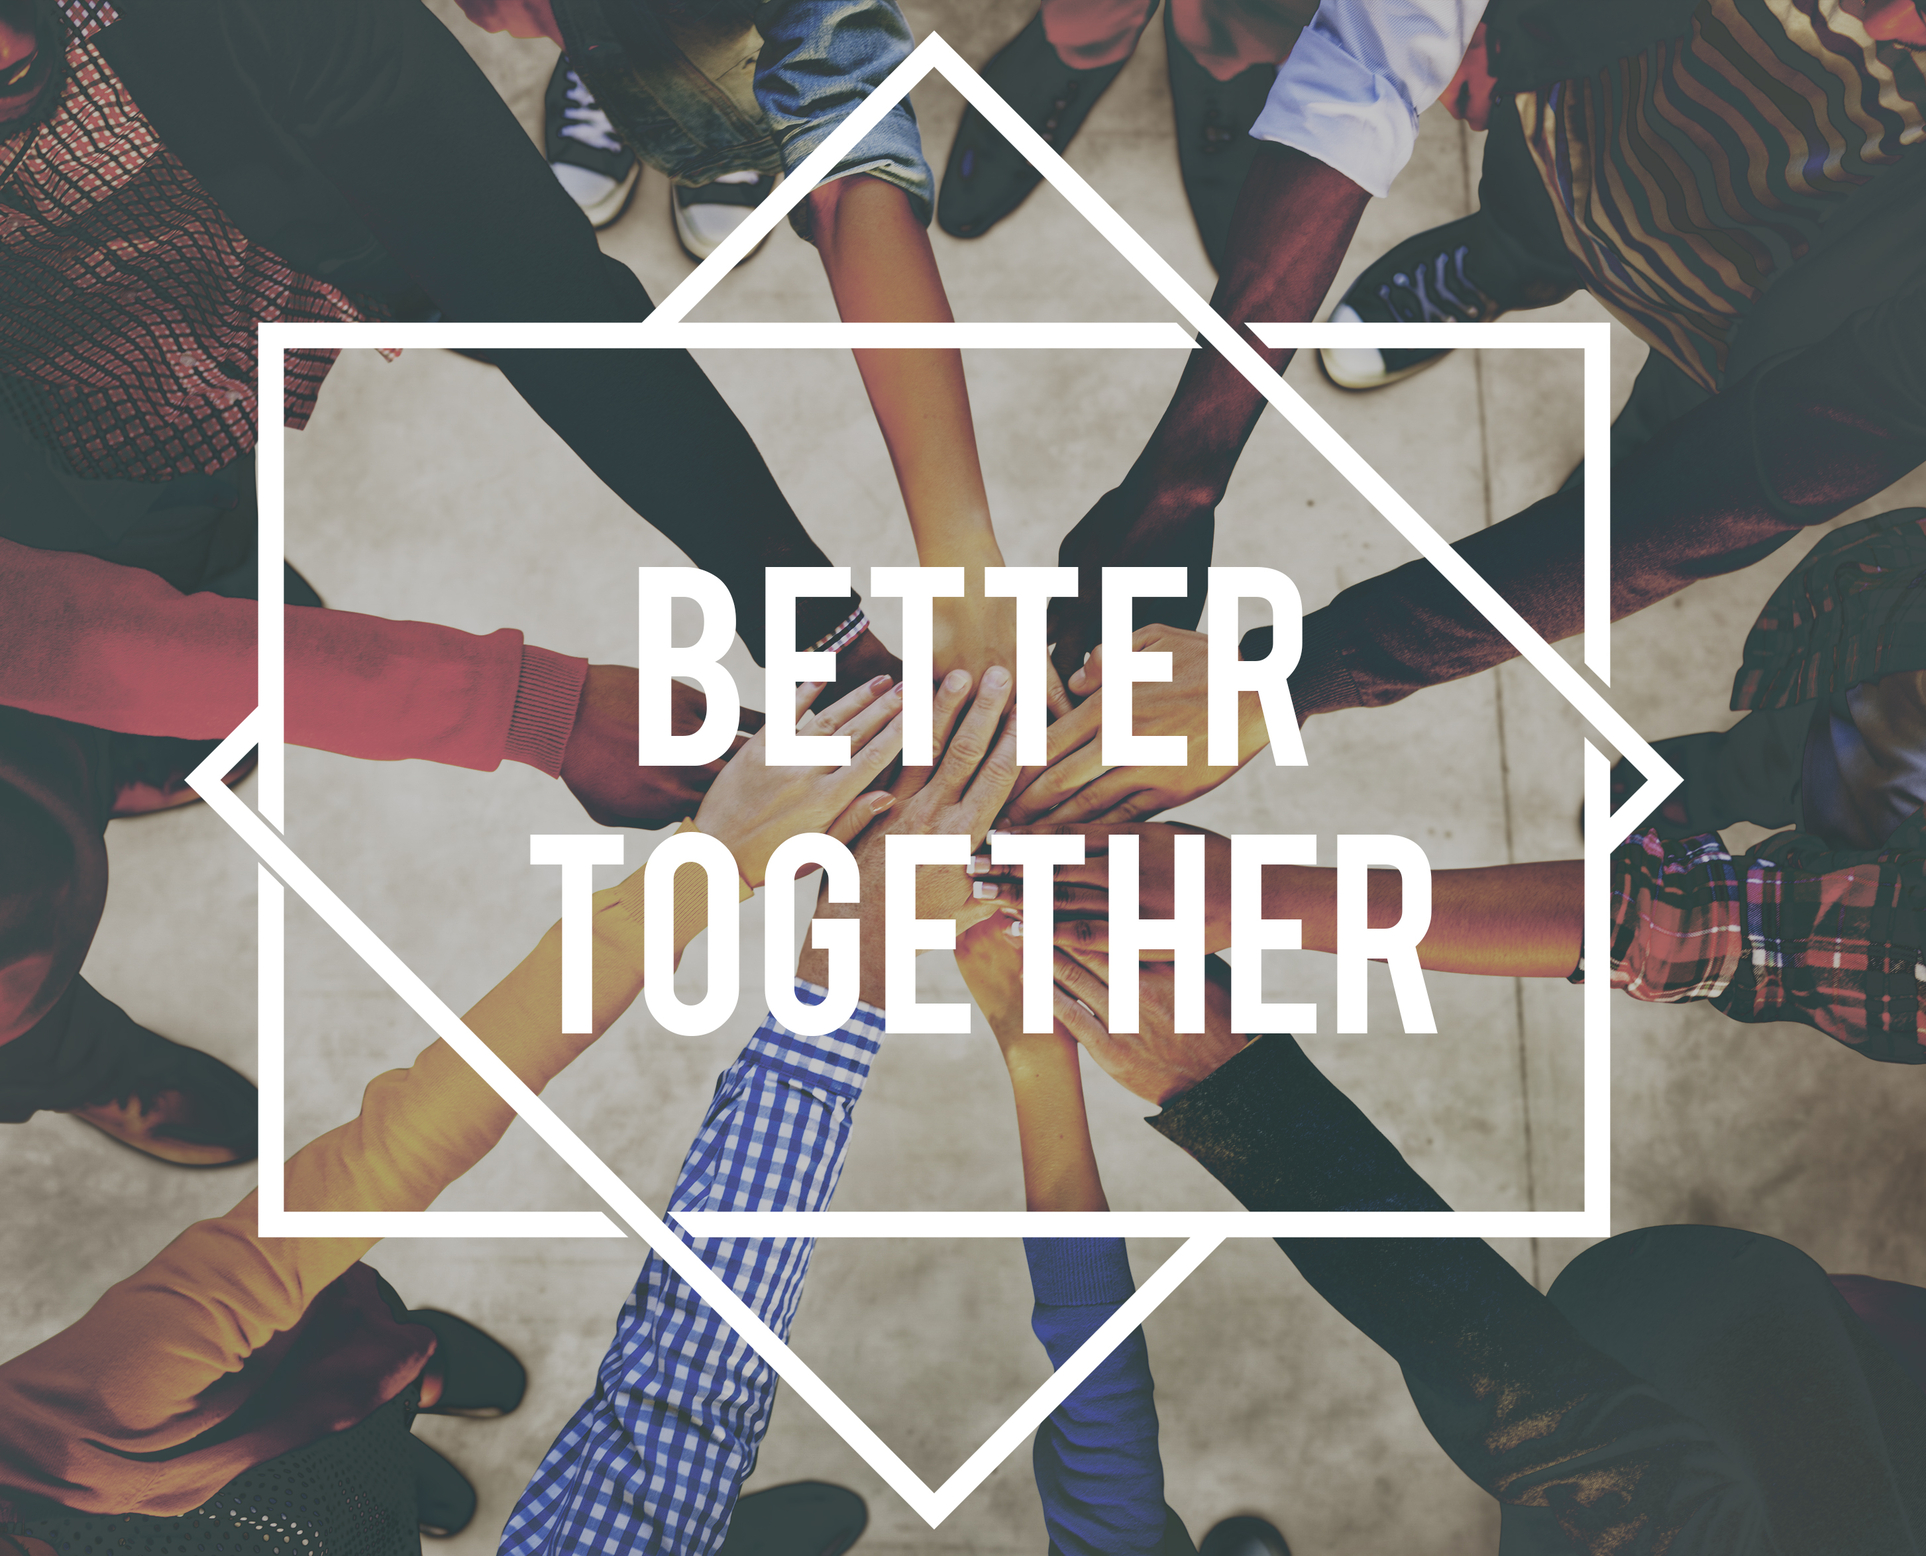 hands together in the center with words on top saying "better together"